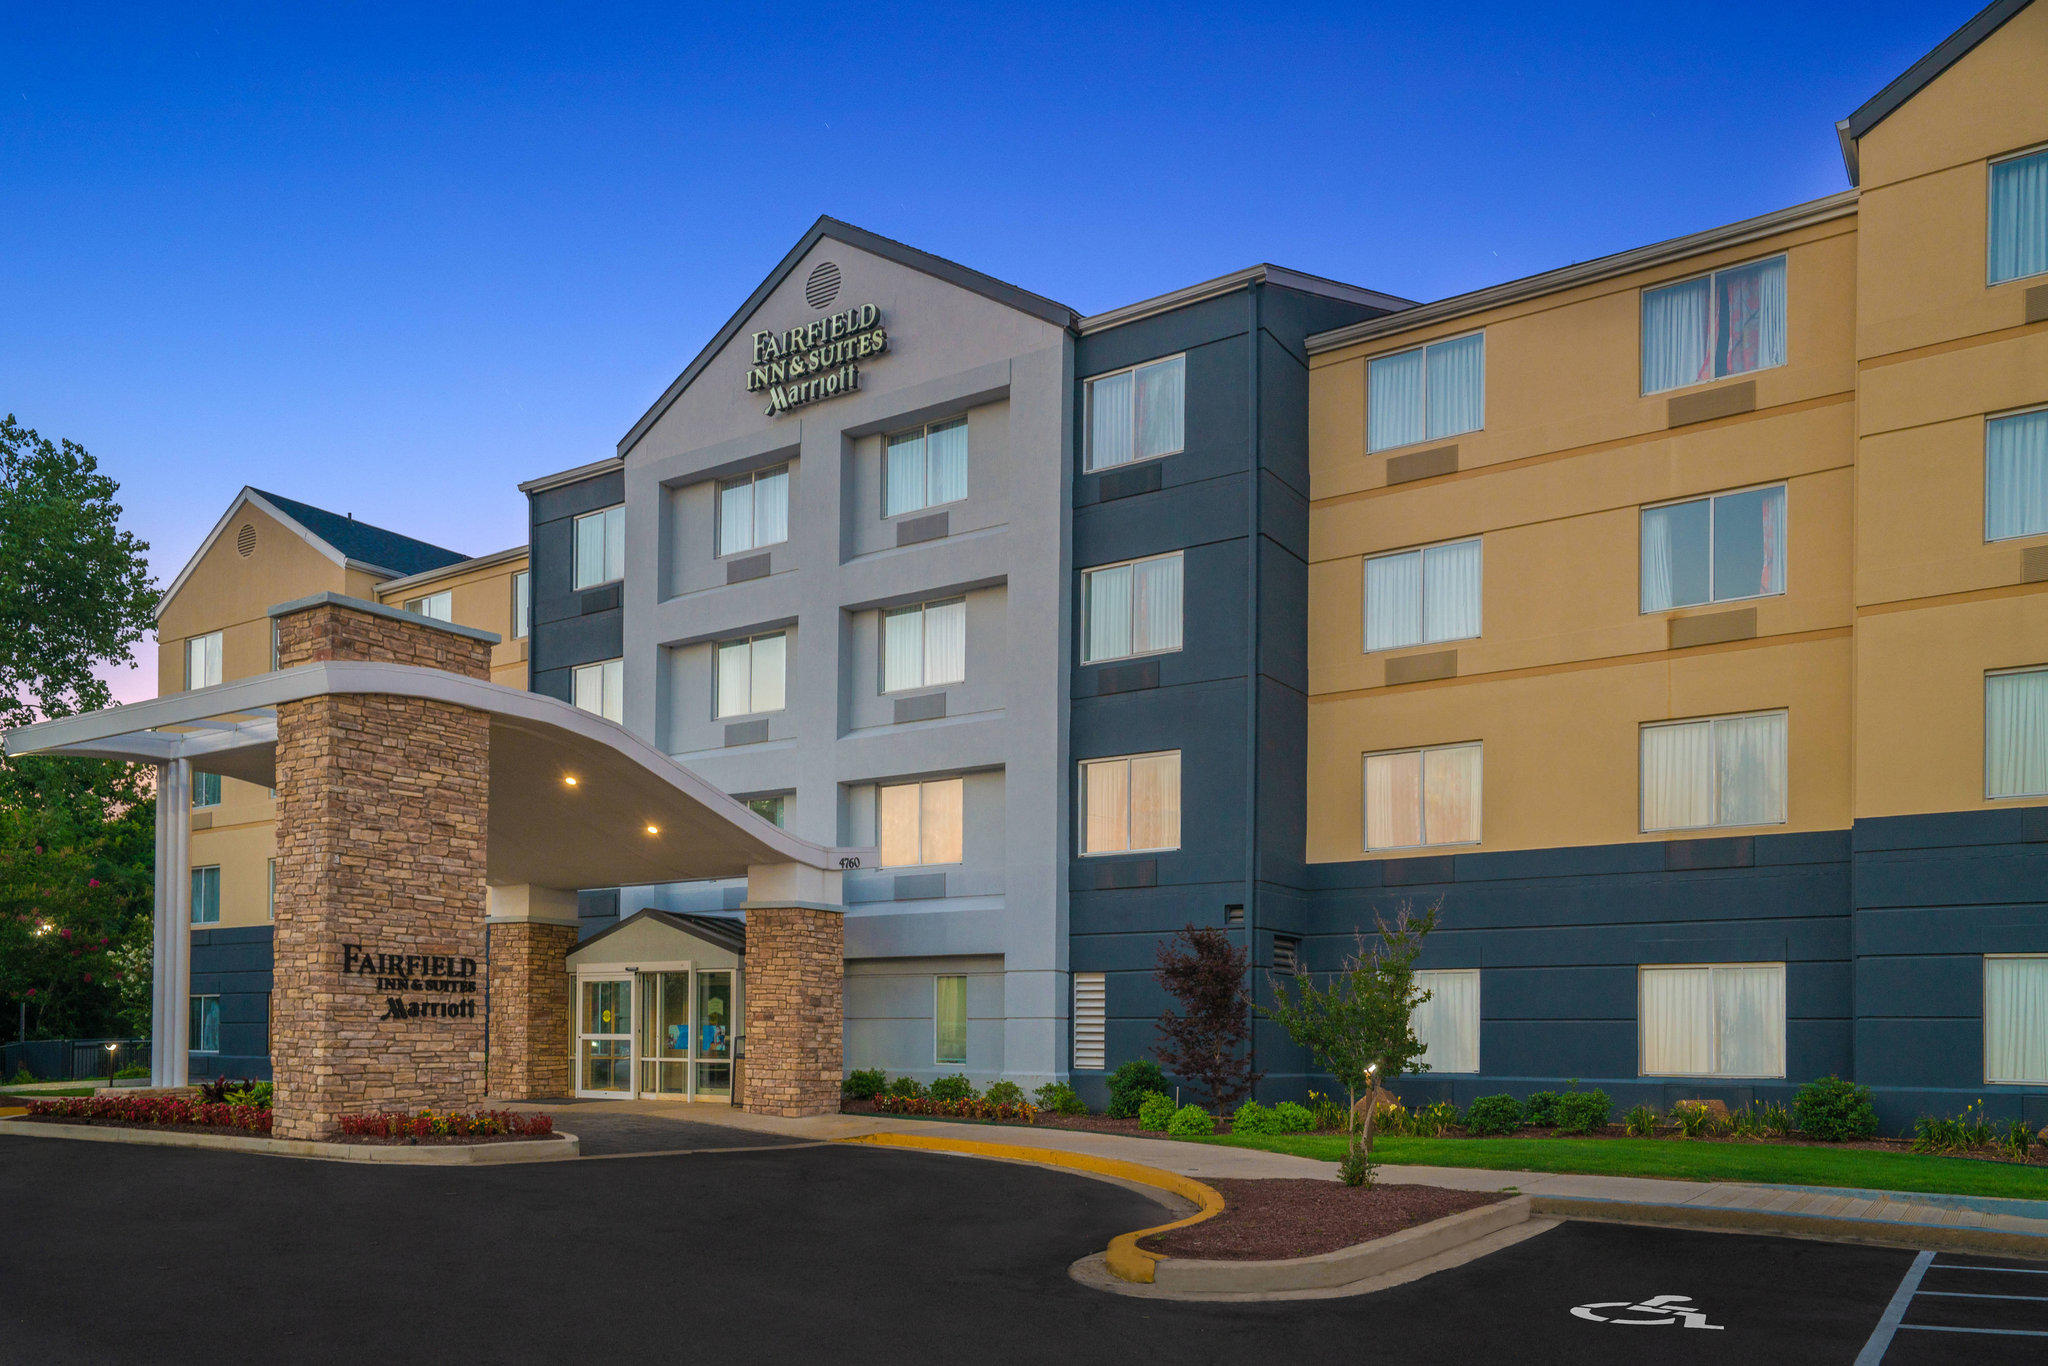 Fairfield Inn And Suites By Marriott Memphis I 240 And Perkins In Memphis Tn Hotels And Motels